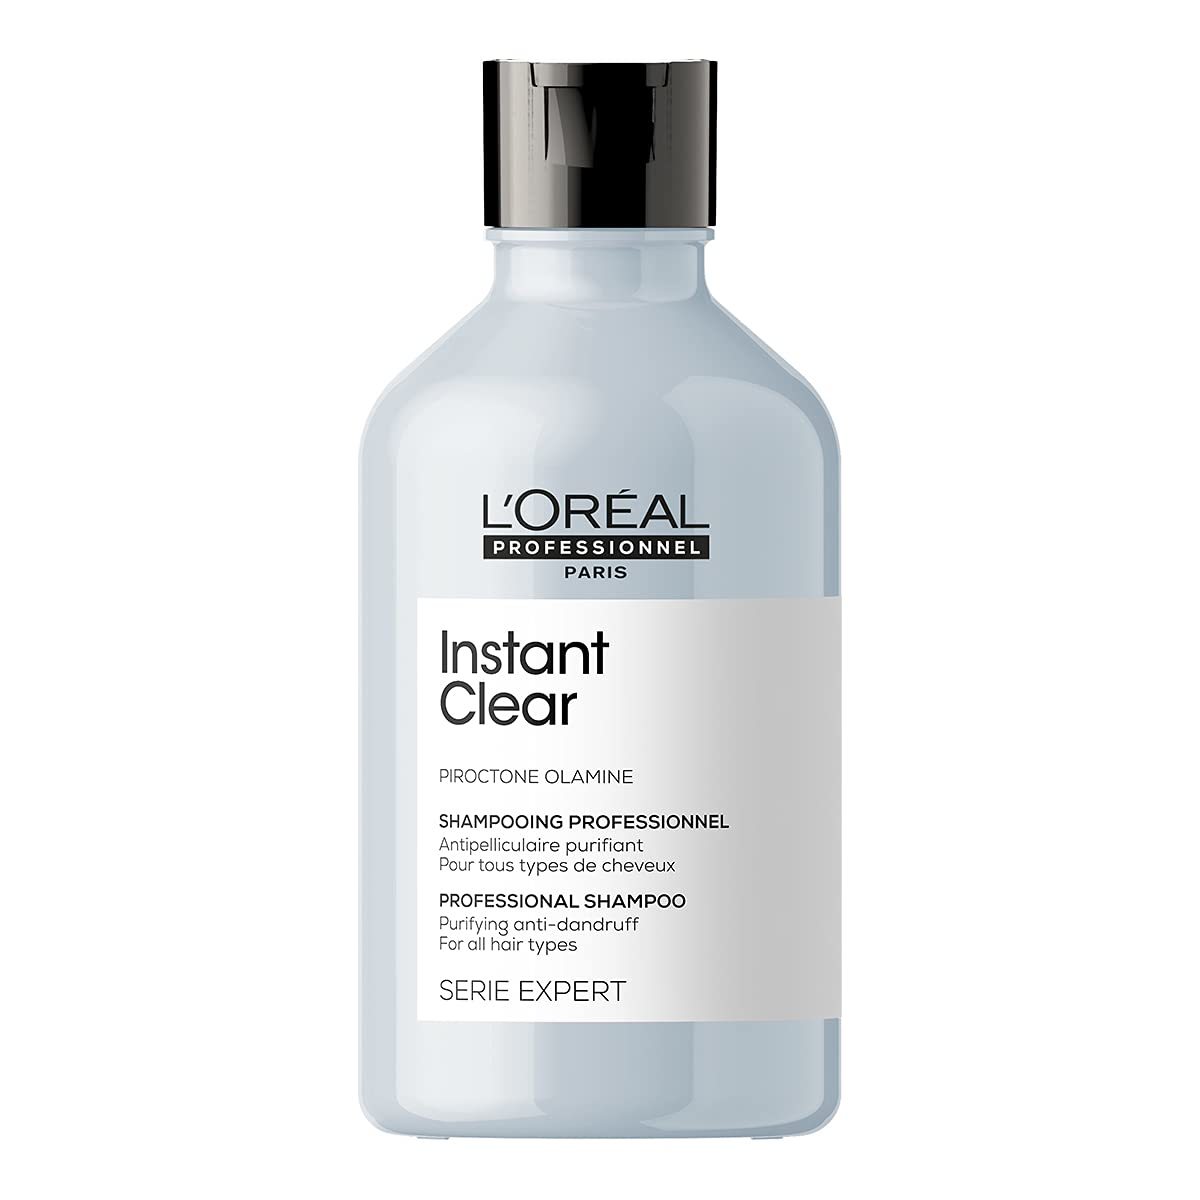 L'OREAL SERİE EXPERT INSTANT CLEAR SHAMPOO 300ML